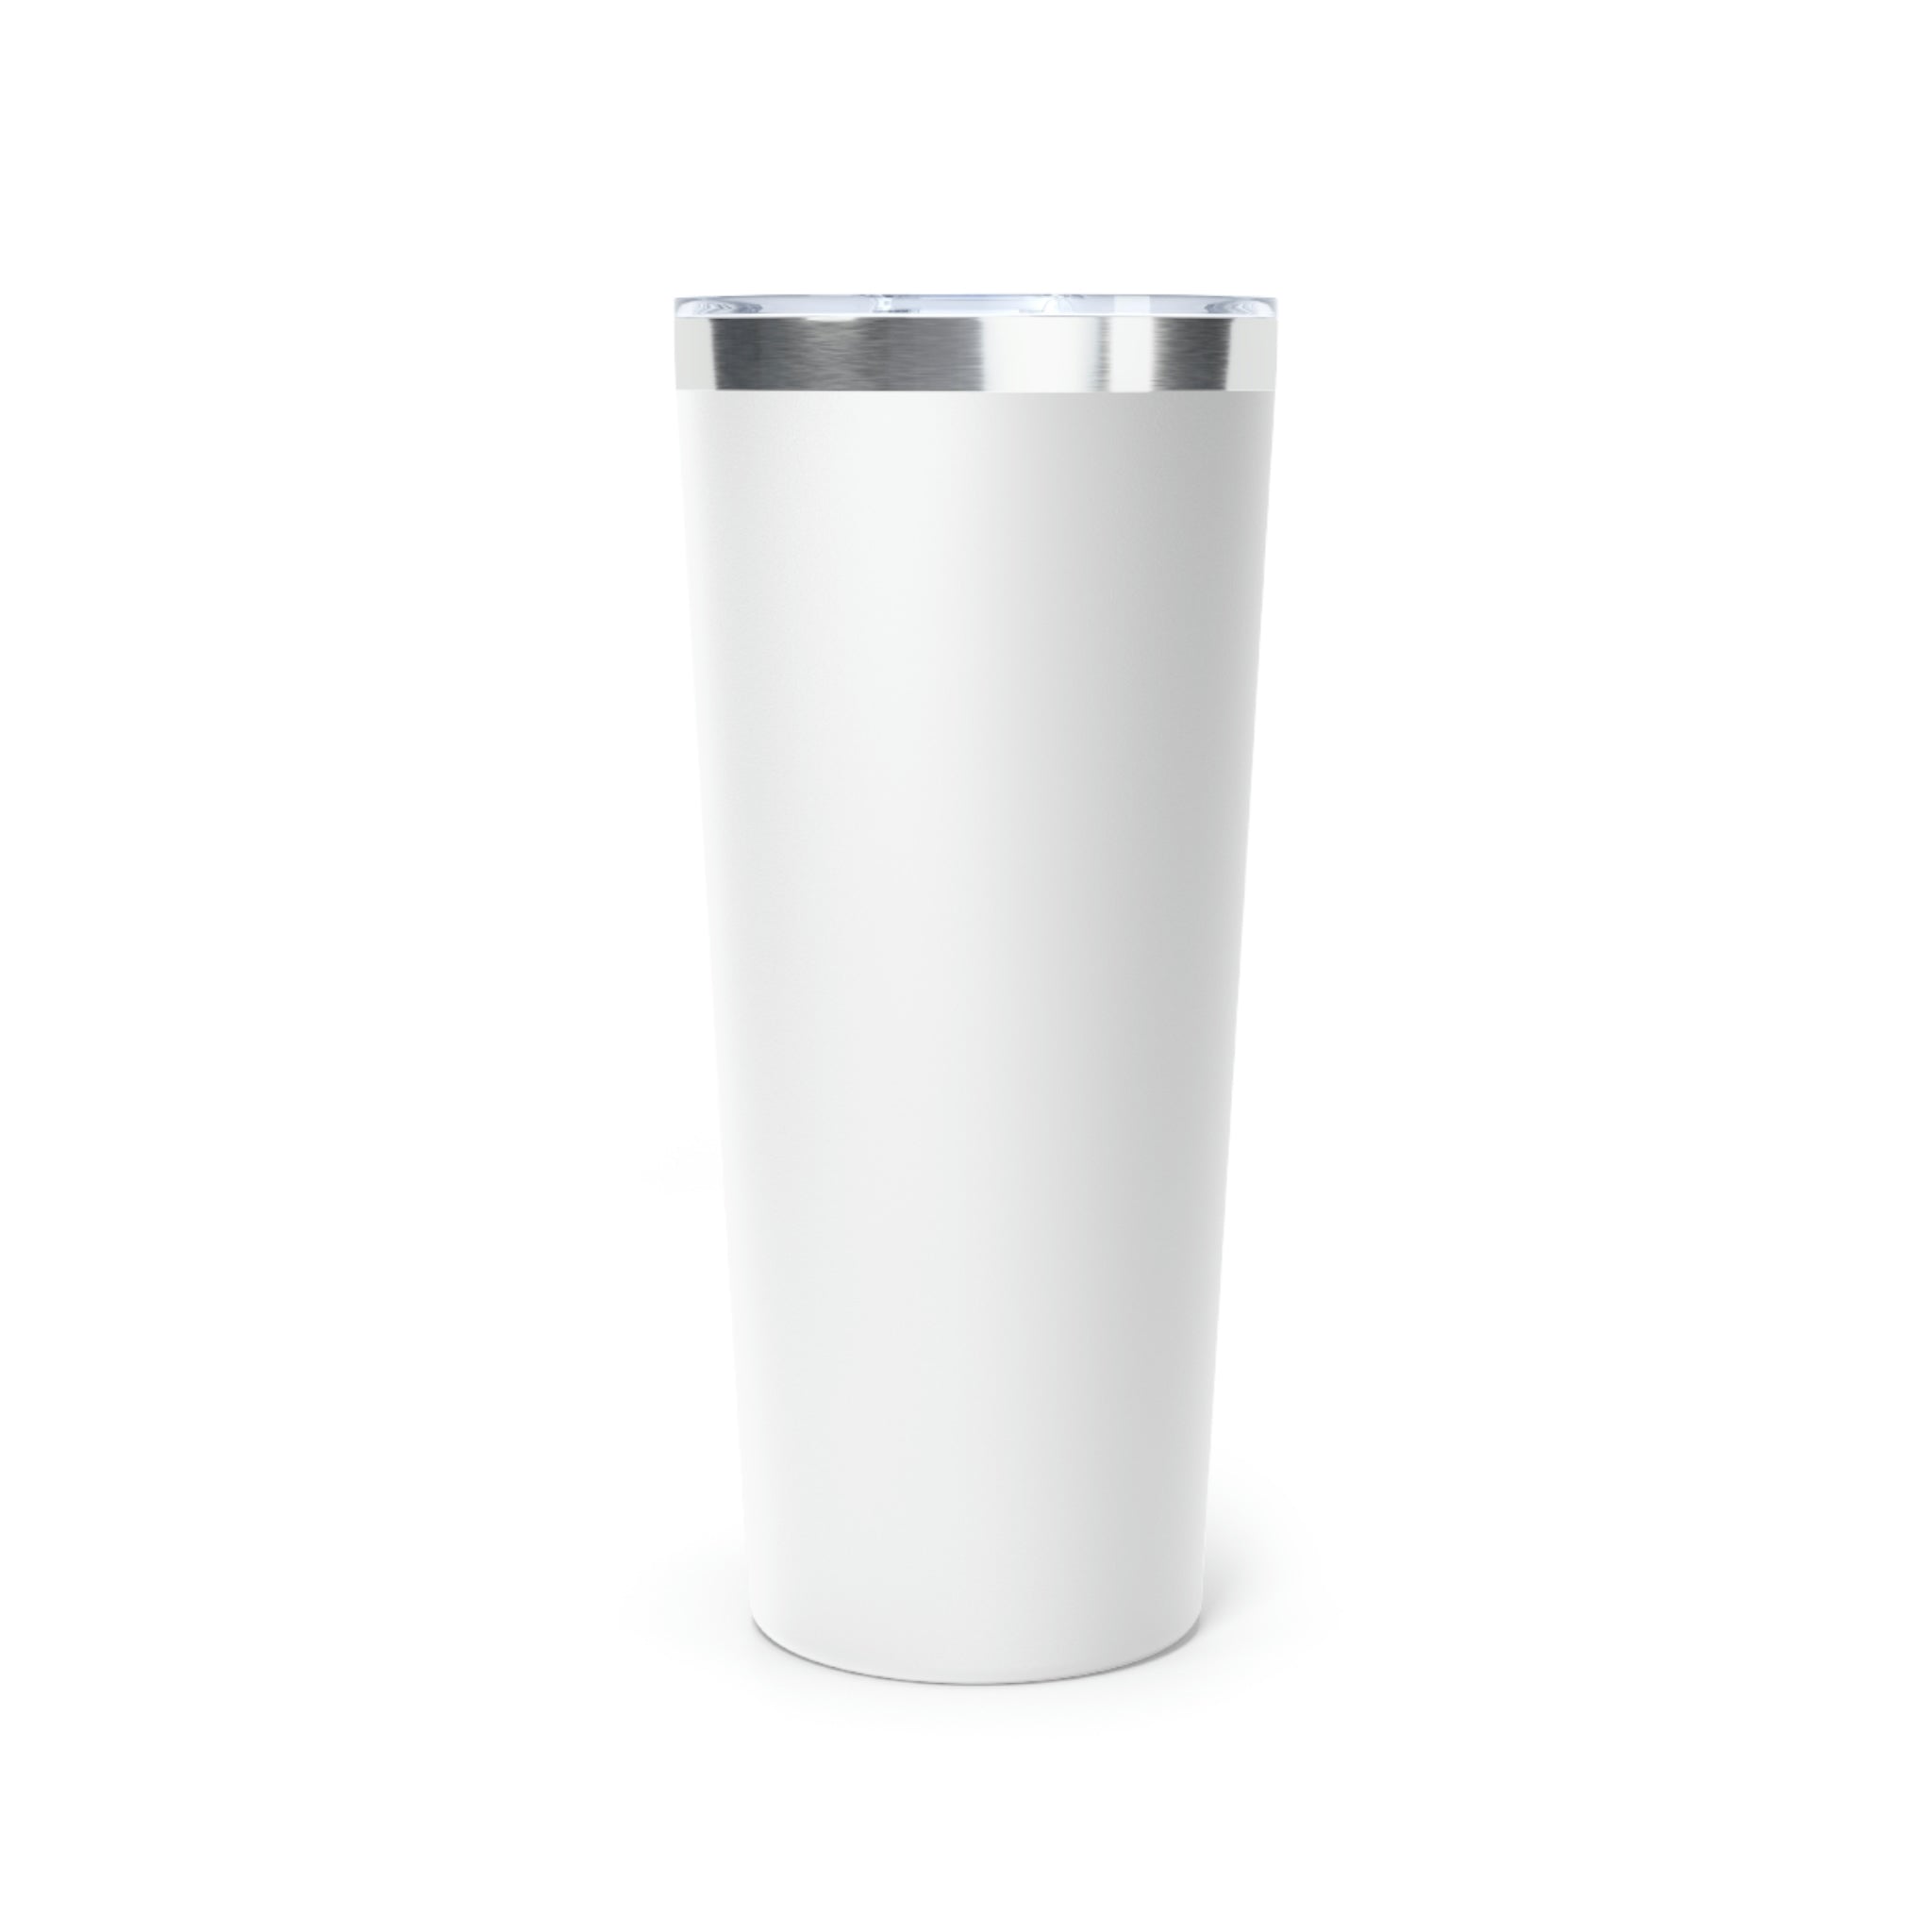 Our Lady of Lourdes Copper Vacuum Insulated Tumbler